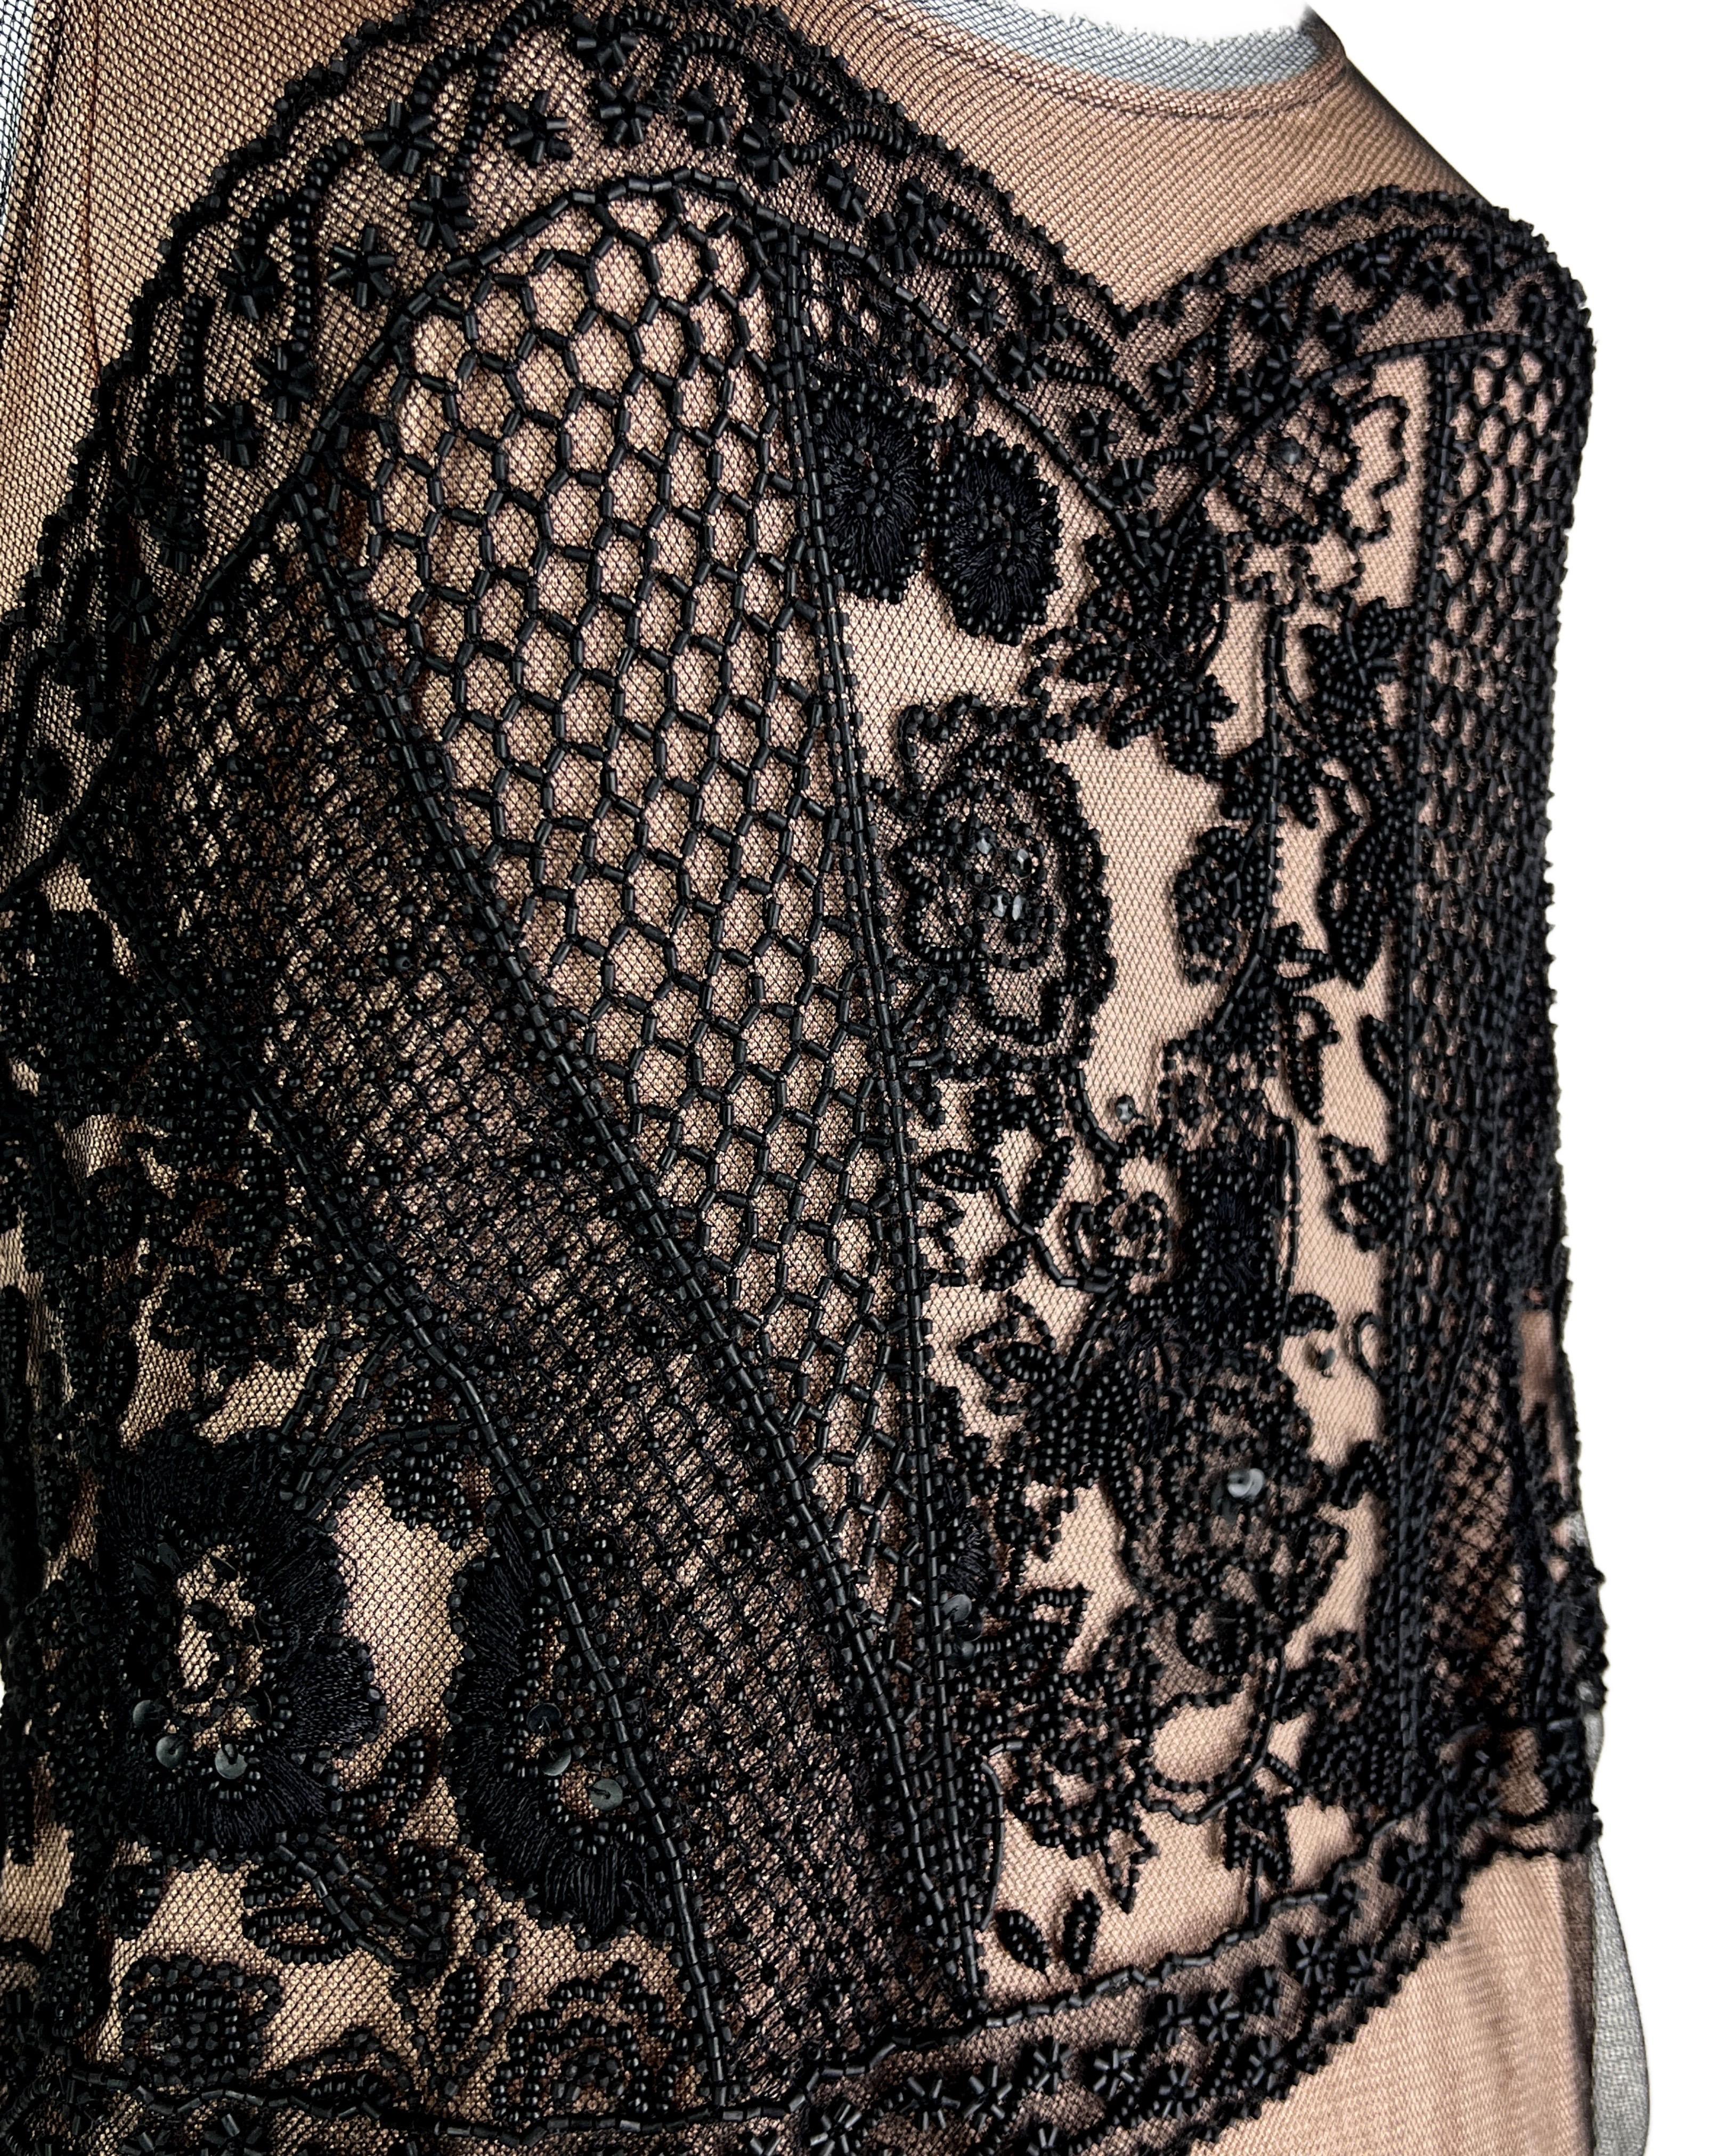 Dior by John Galliano Spring 2006 Embroidered Mesh Silk Mini Dress For Sale 2